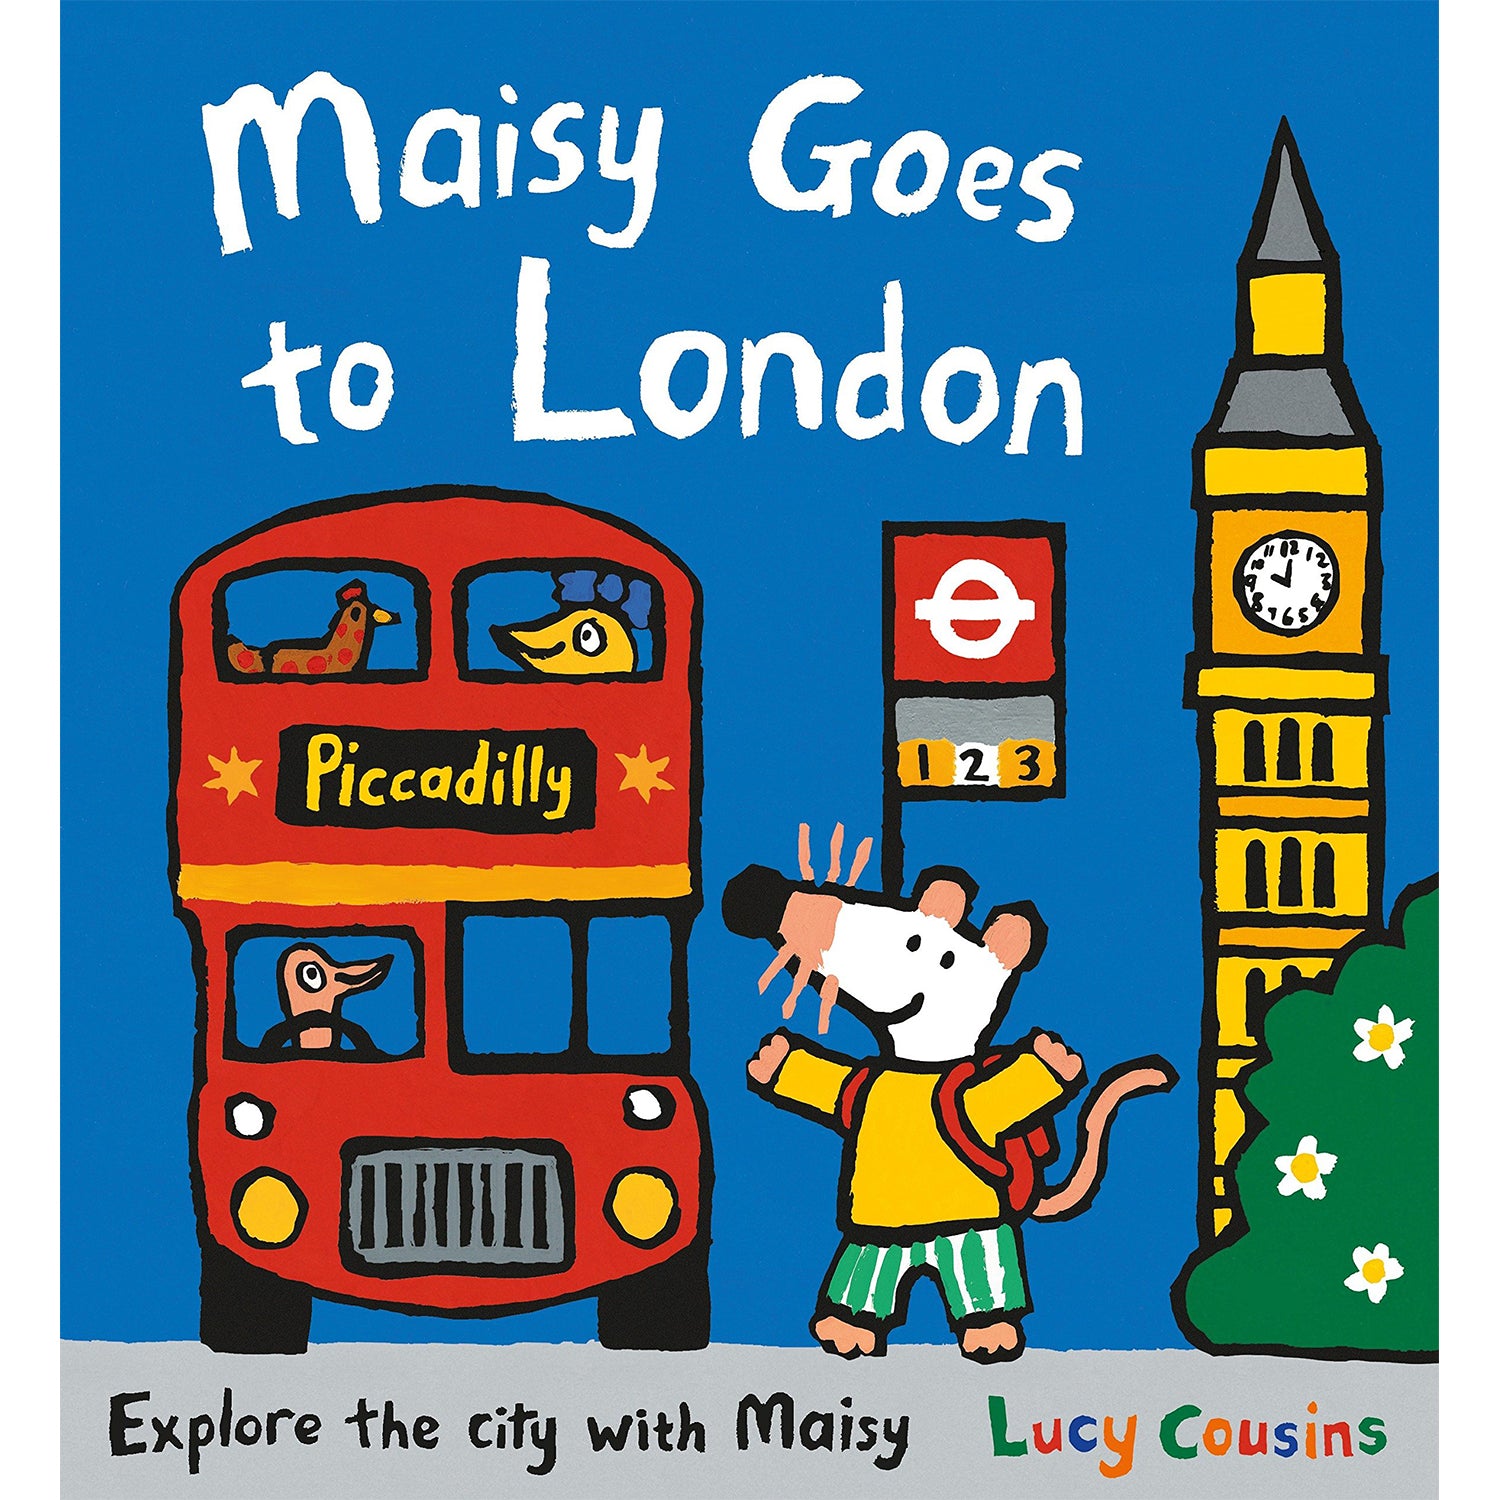 Maisy Goes To London book cover